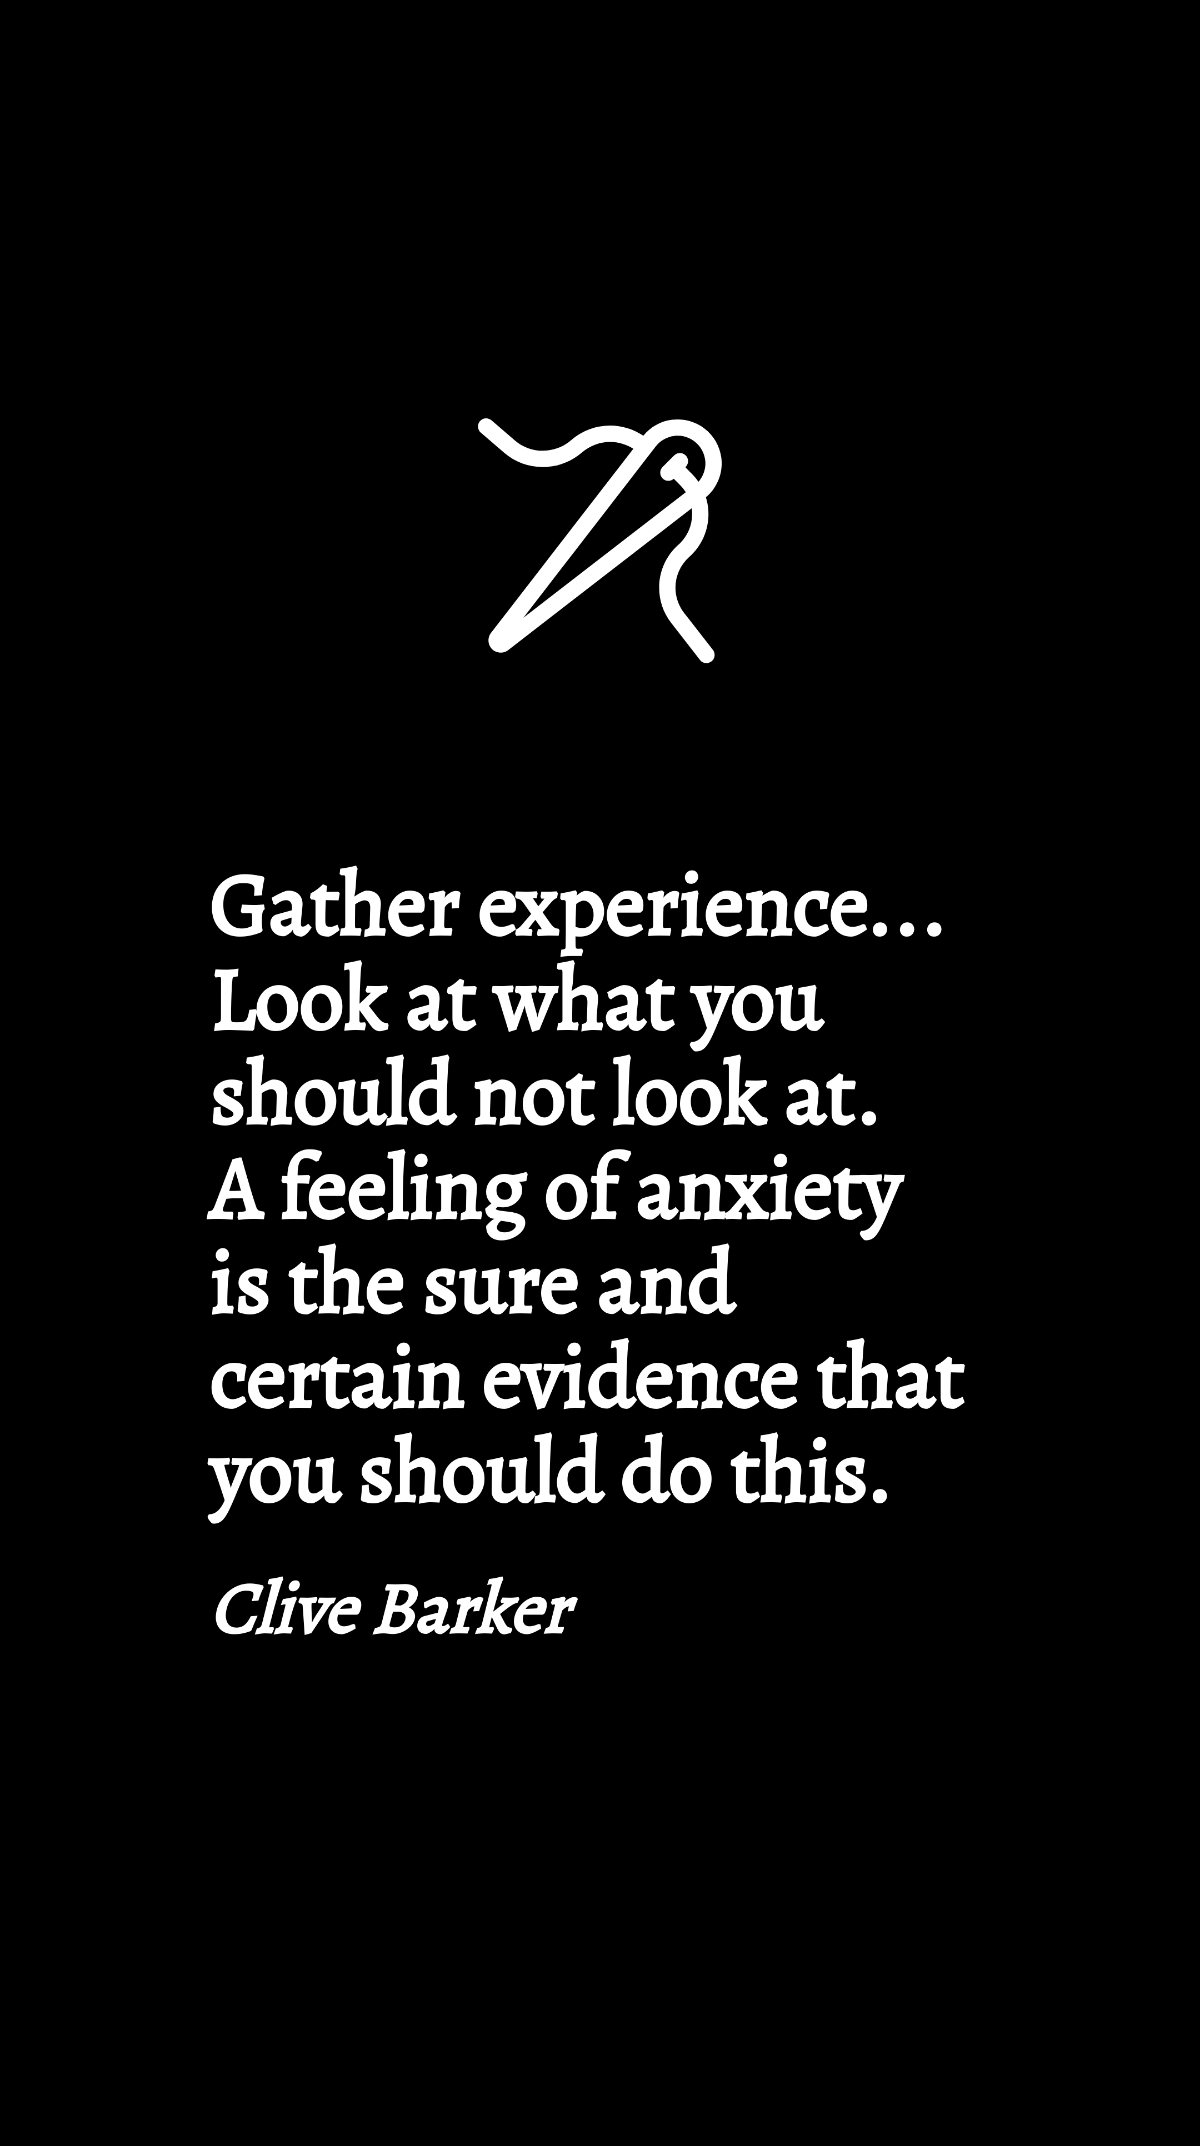 Clive Barker - Gather experience... Look at what you should not look at. A feeling of anxiety is the sure and certain evidence that you should do this. Template